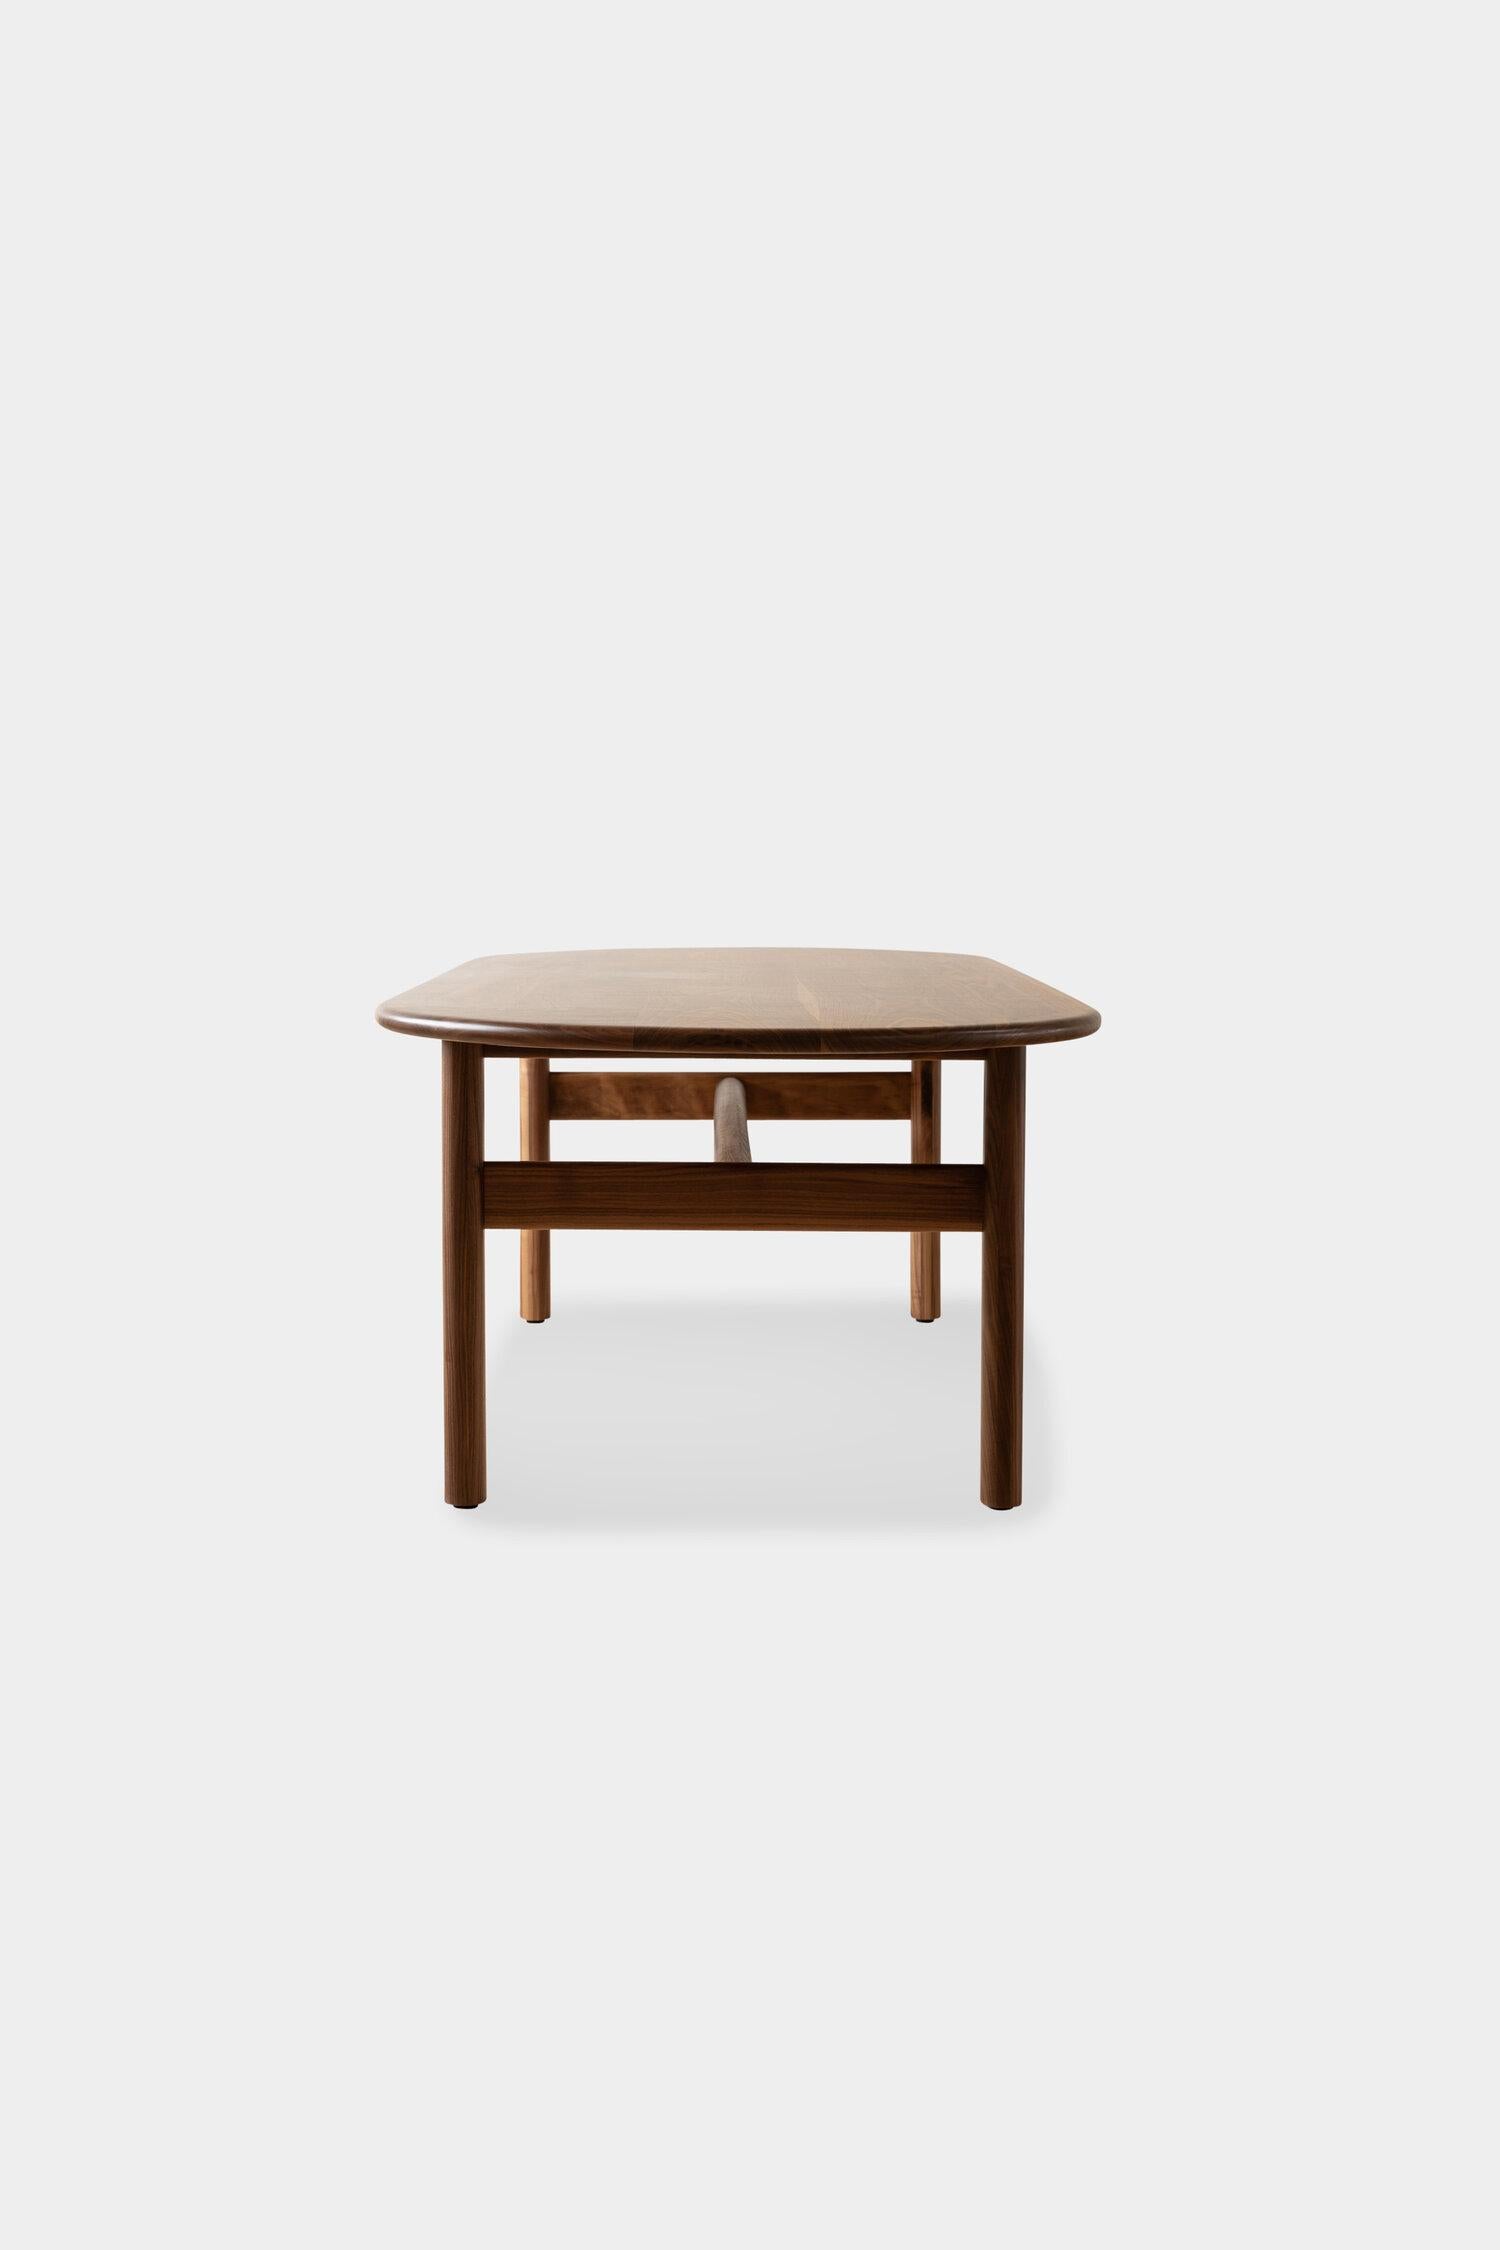 Contemporary EARL Walnut Pill top bullnose edge Palang Dining Table For Sale